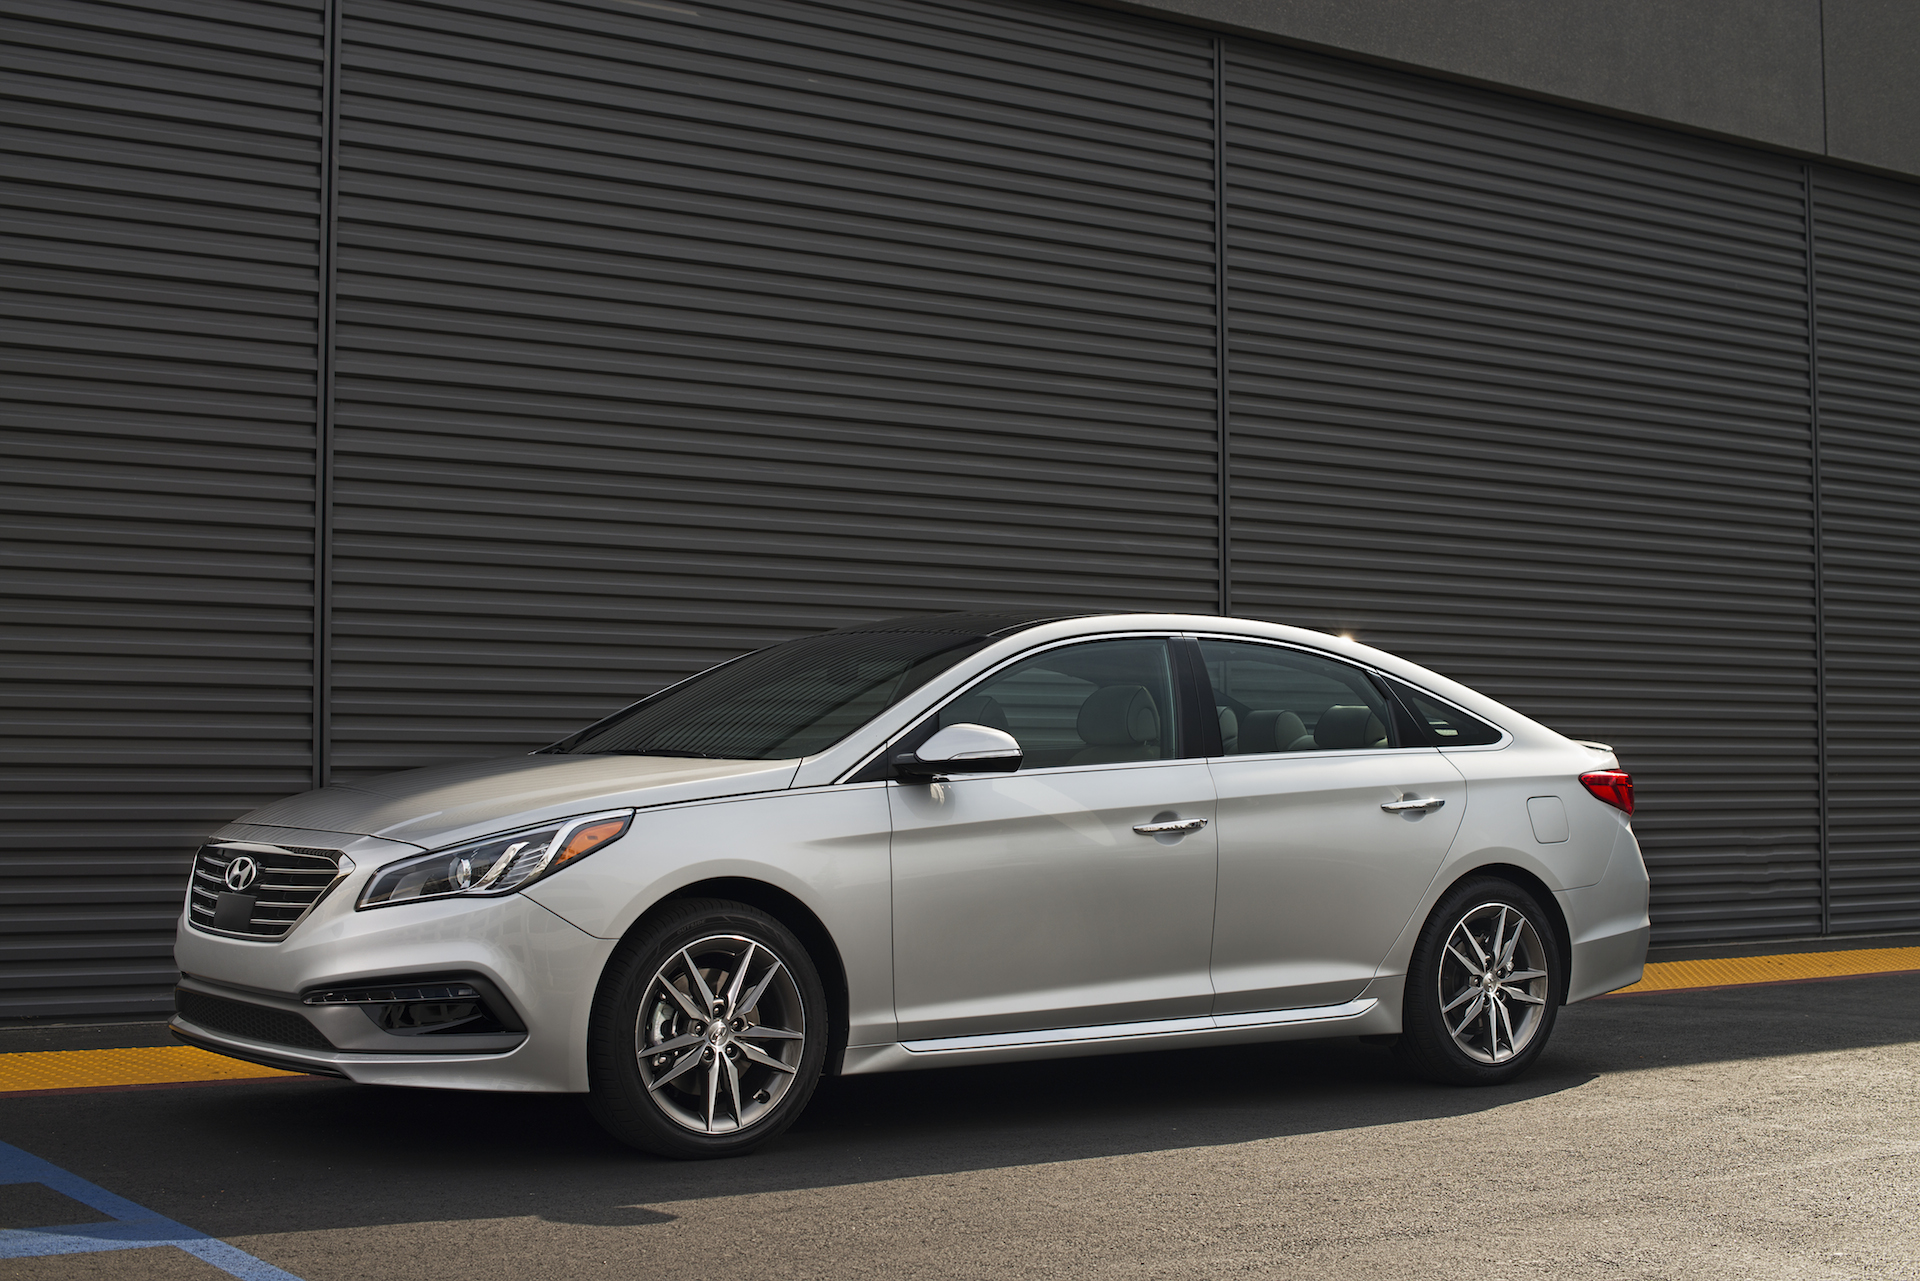 2015 Hyundai Sonata Review Ratings Specs Prices And Photos - The Car Connection